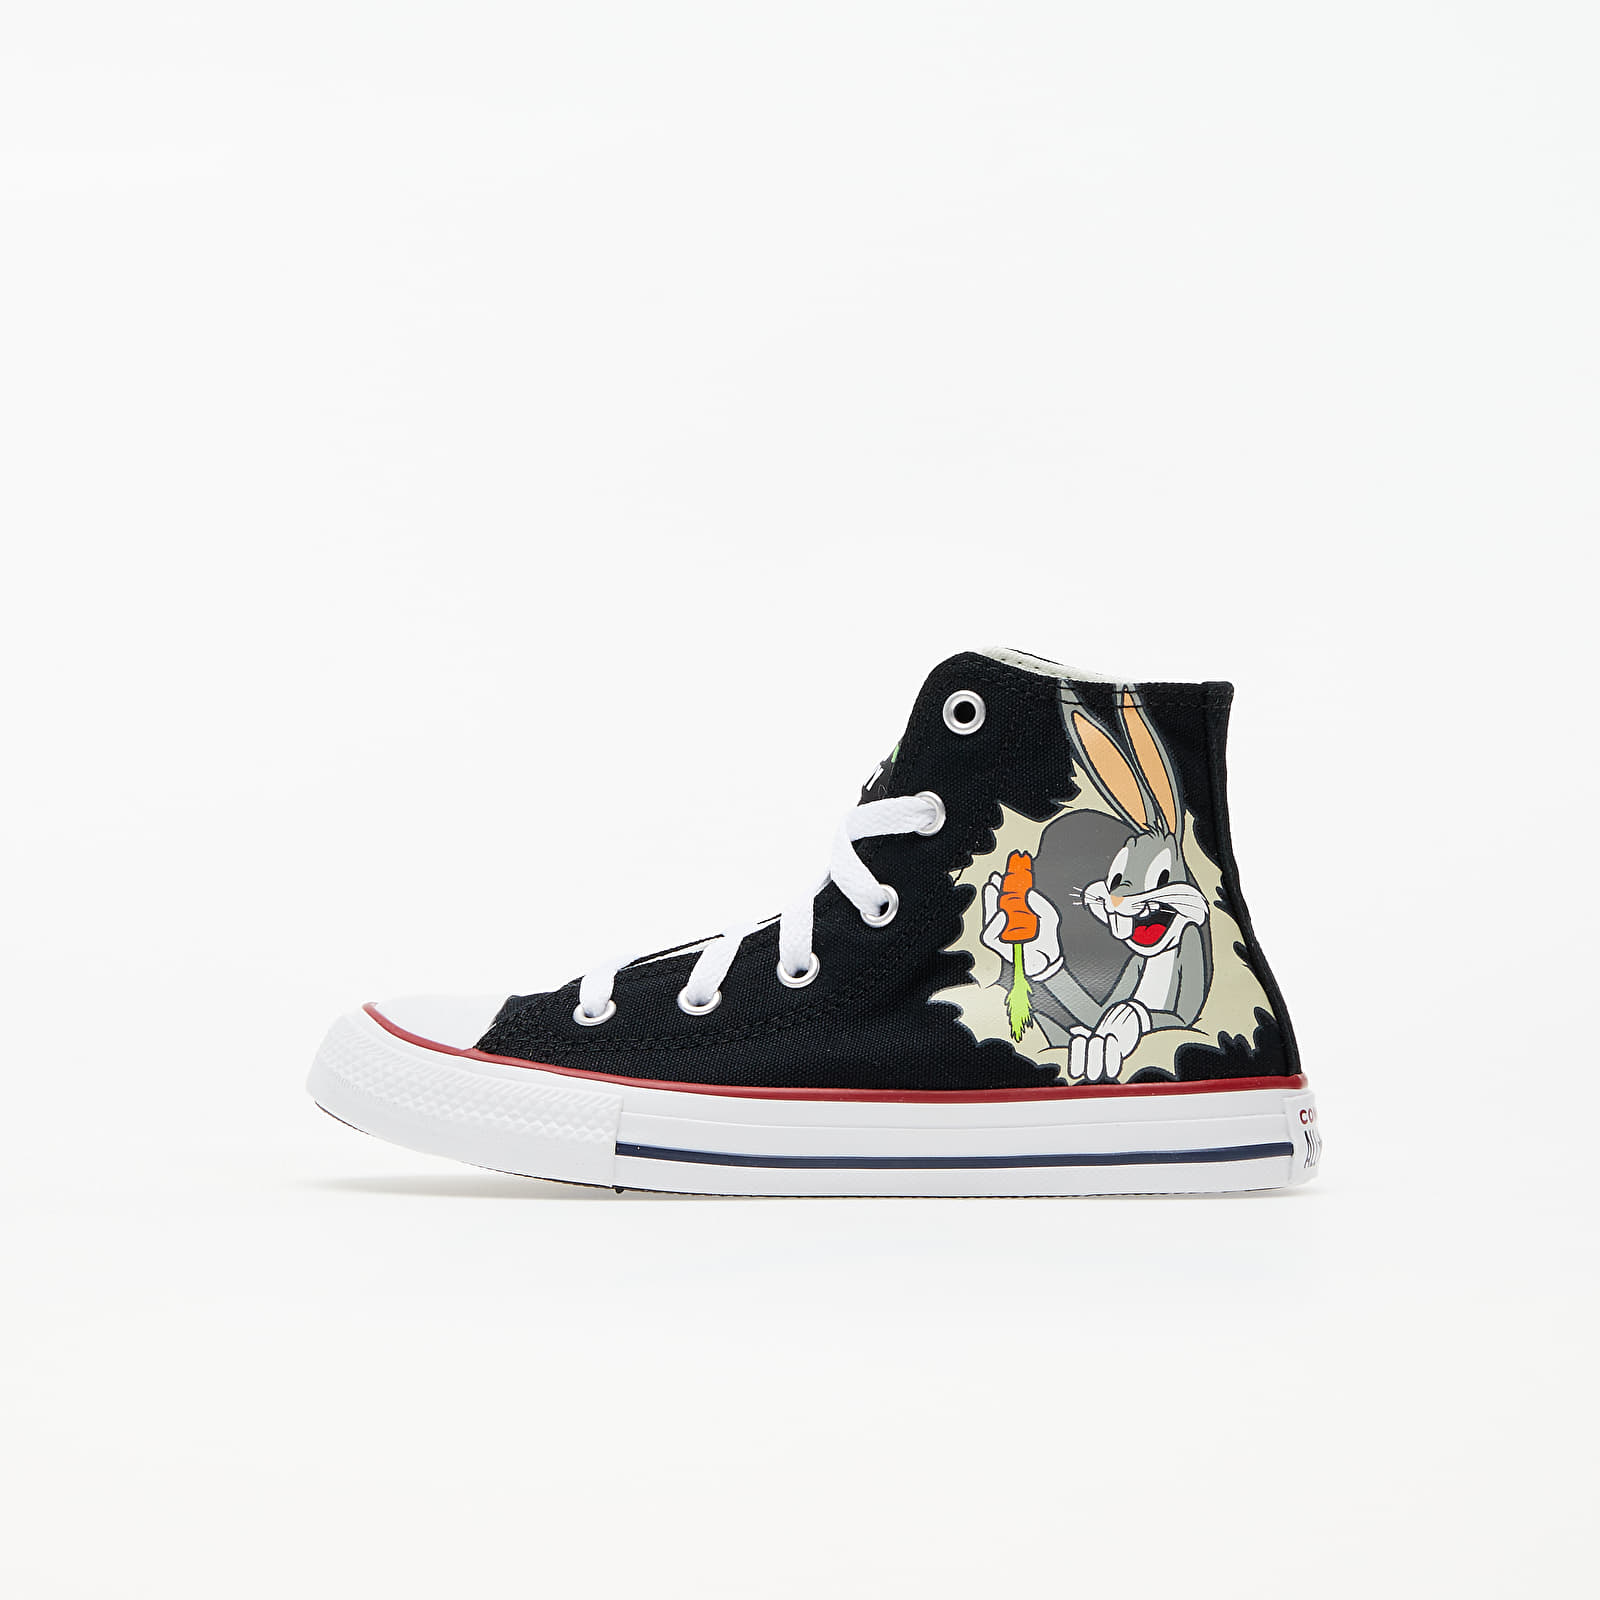 Kids' sneakers and shoes Converse x Bugs Bunny Chuck Taylor All Star Hi Black/ Multi